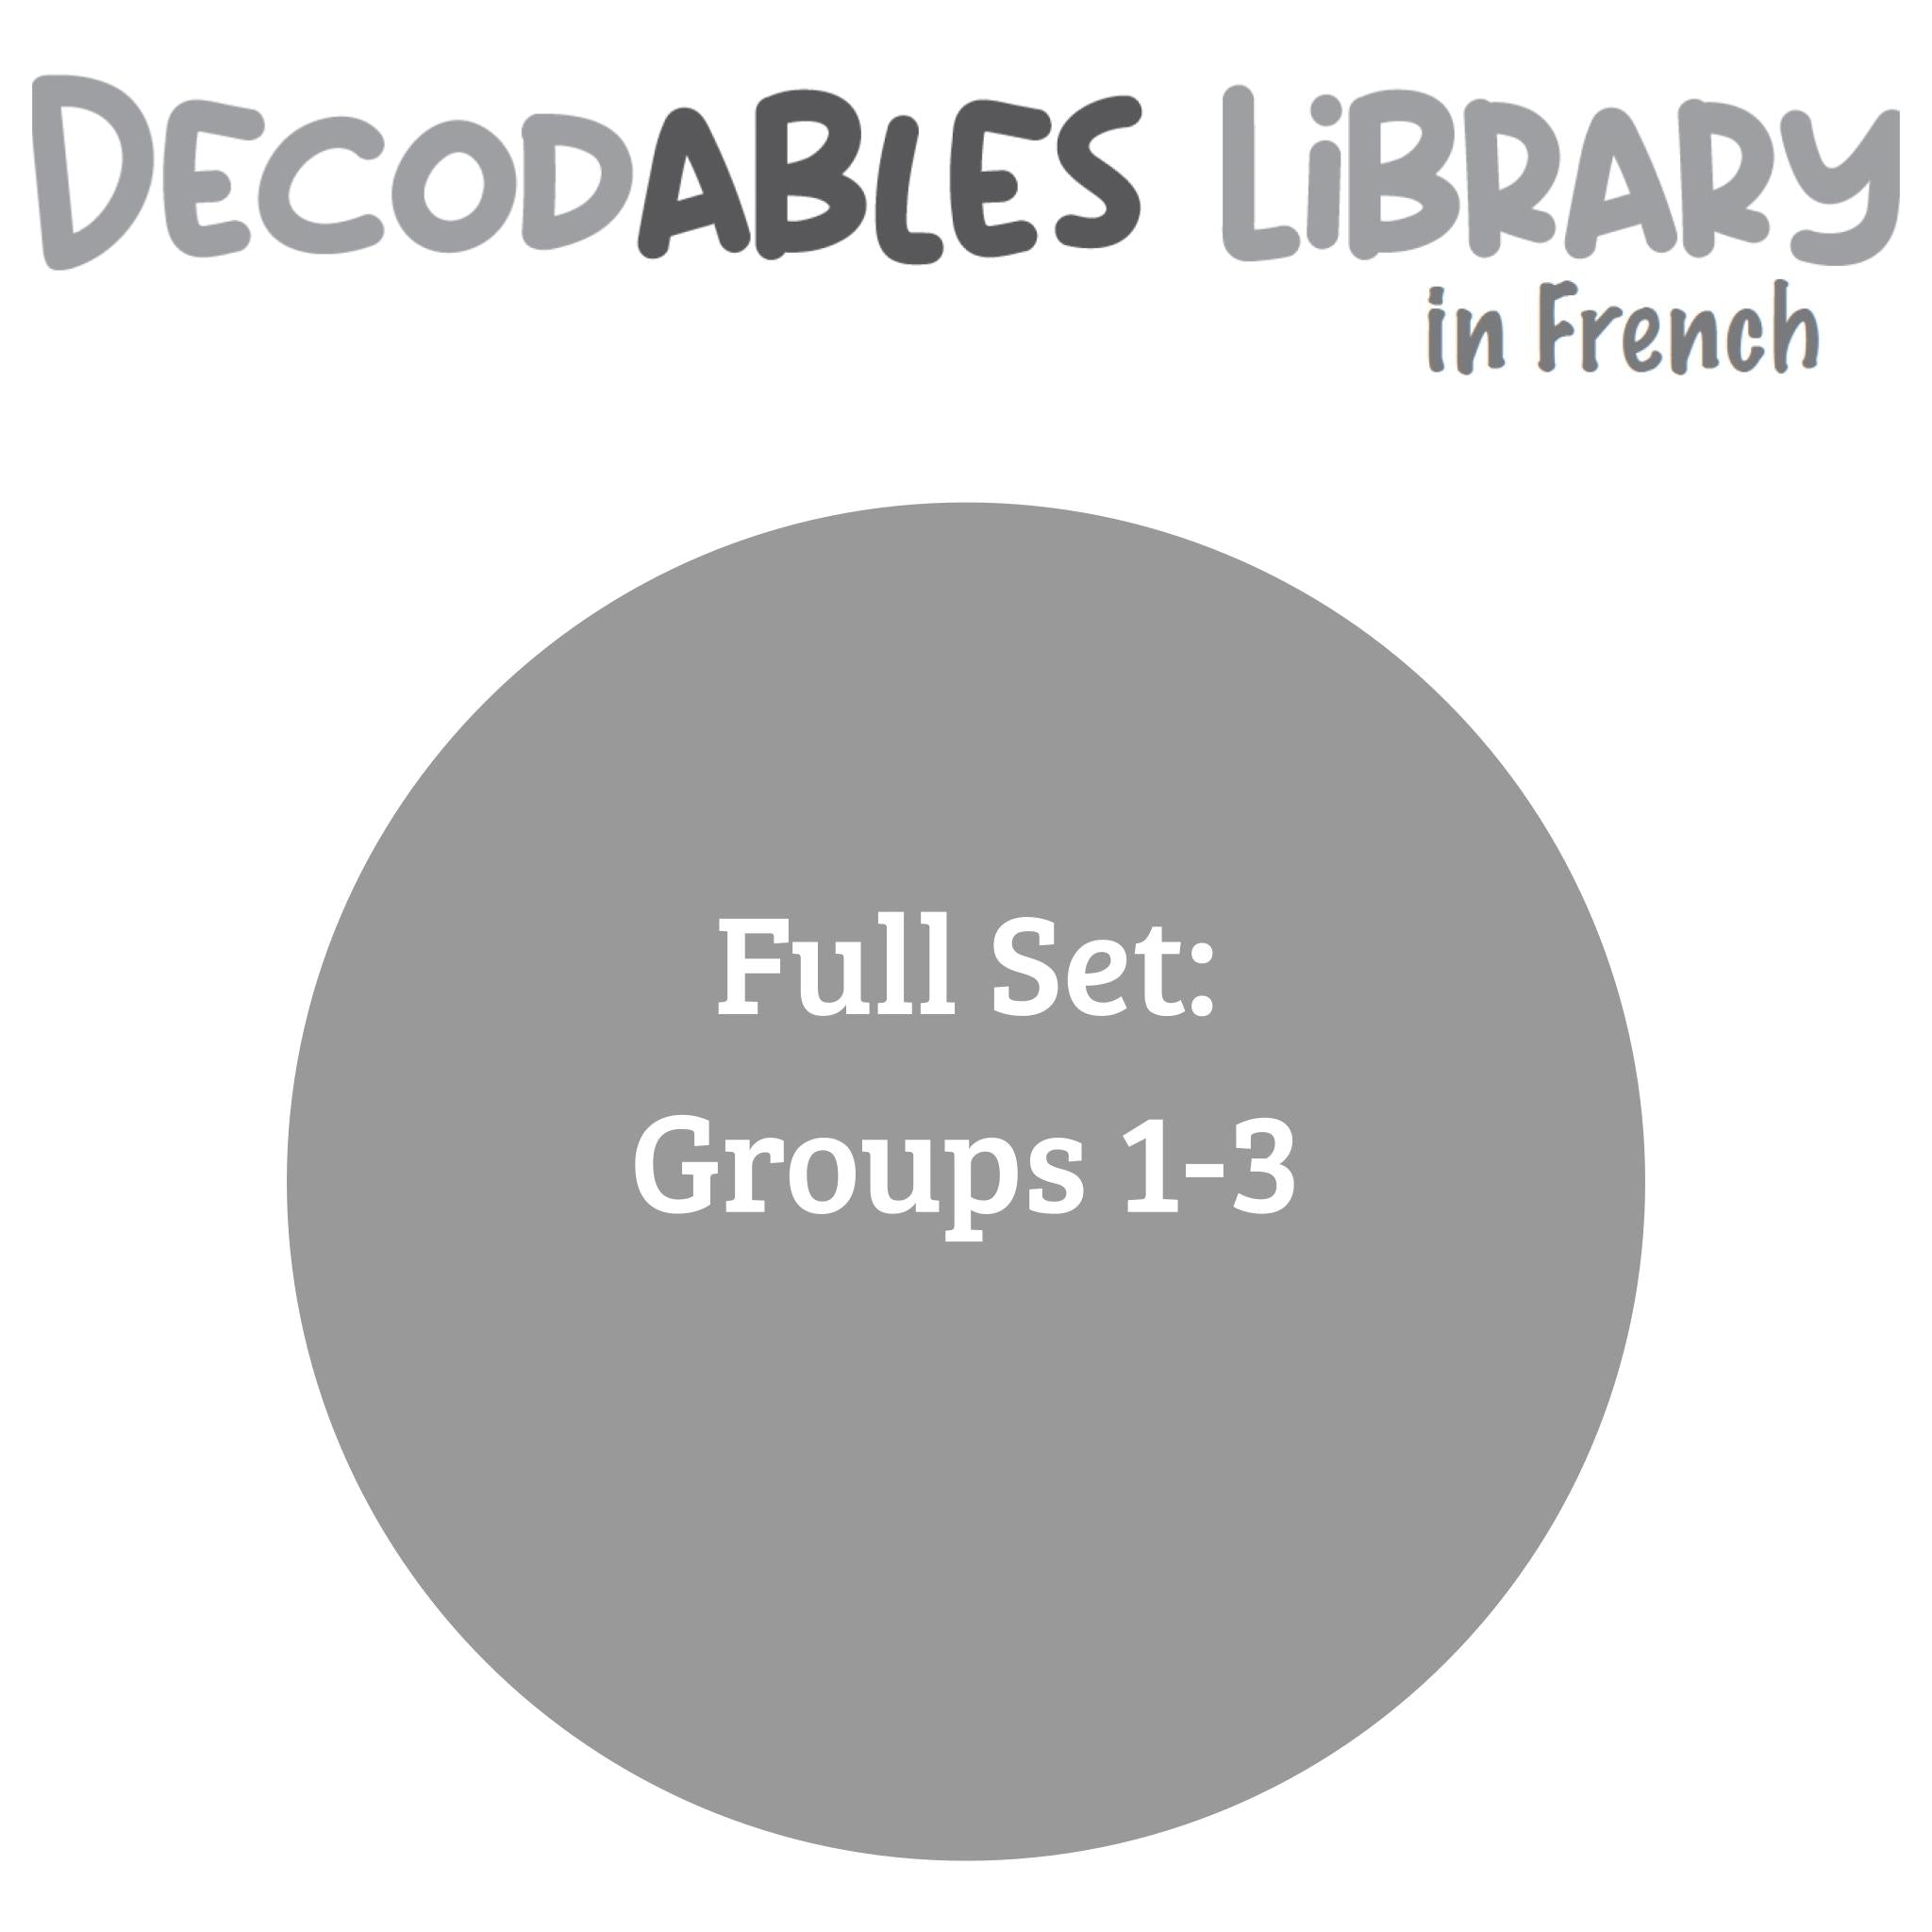 French Decodables Library - Full Set - Groups 1-3 (set of 95 titles)